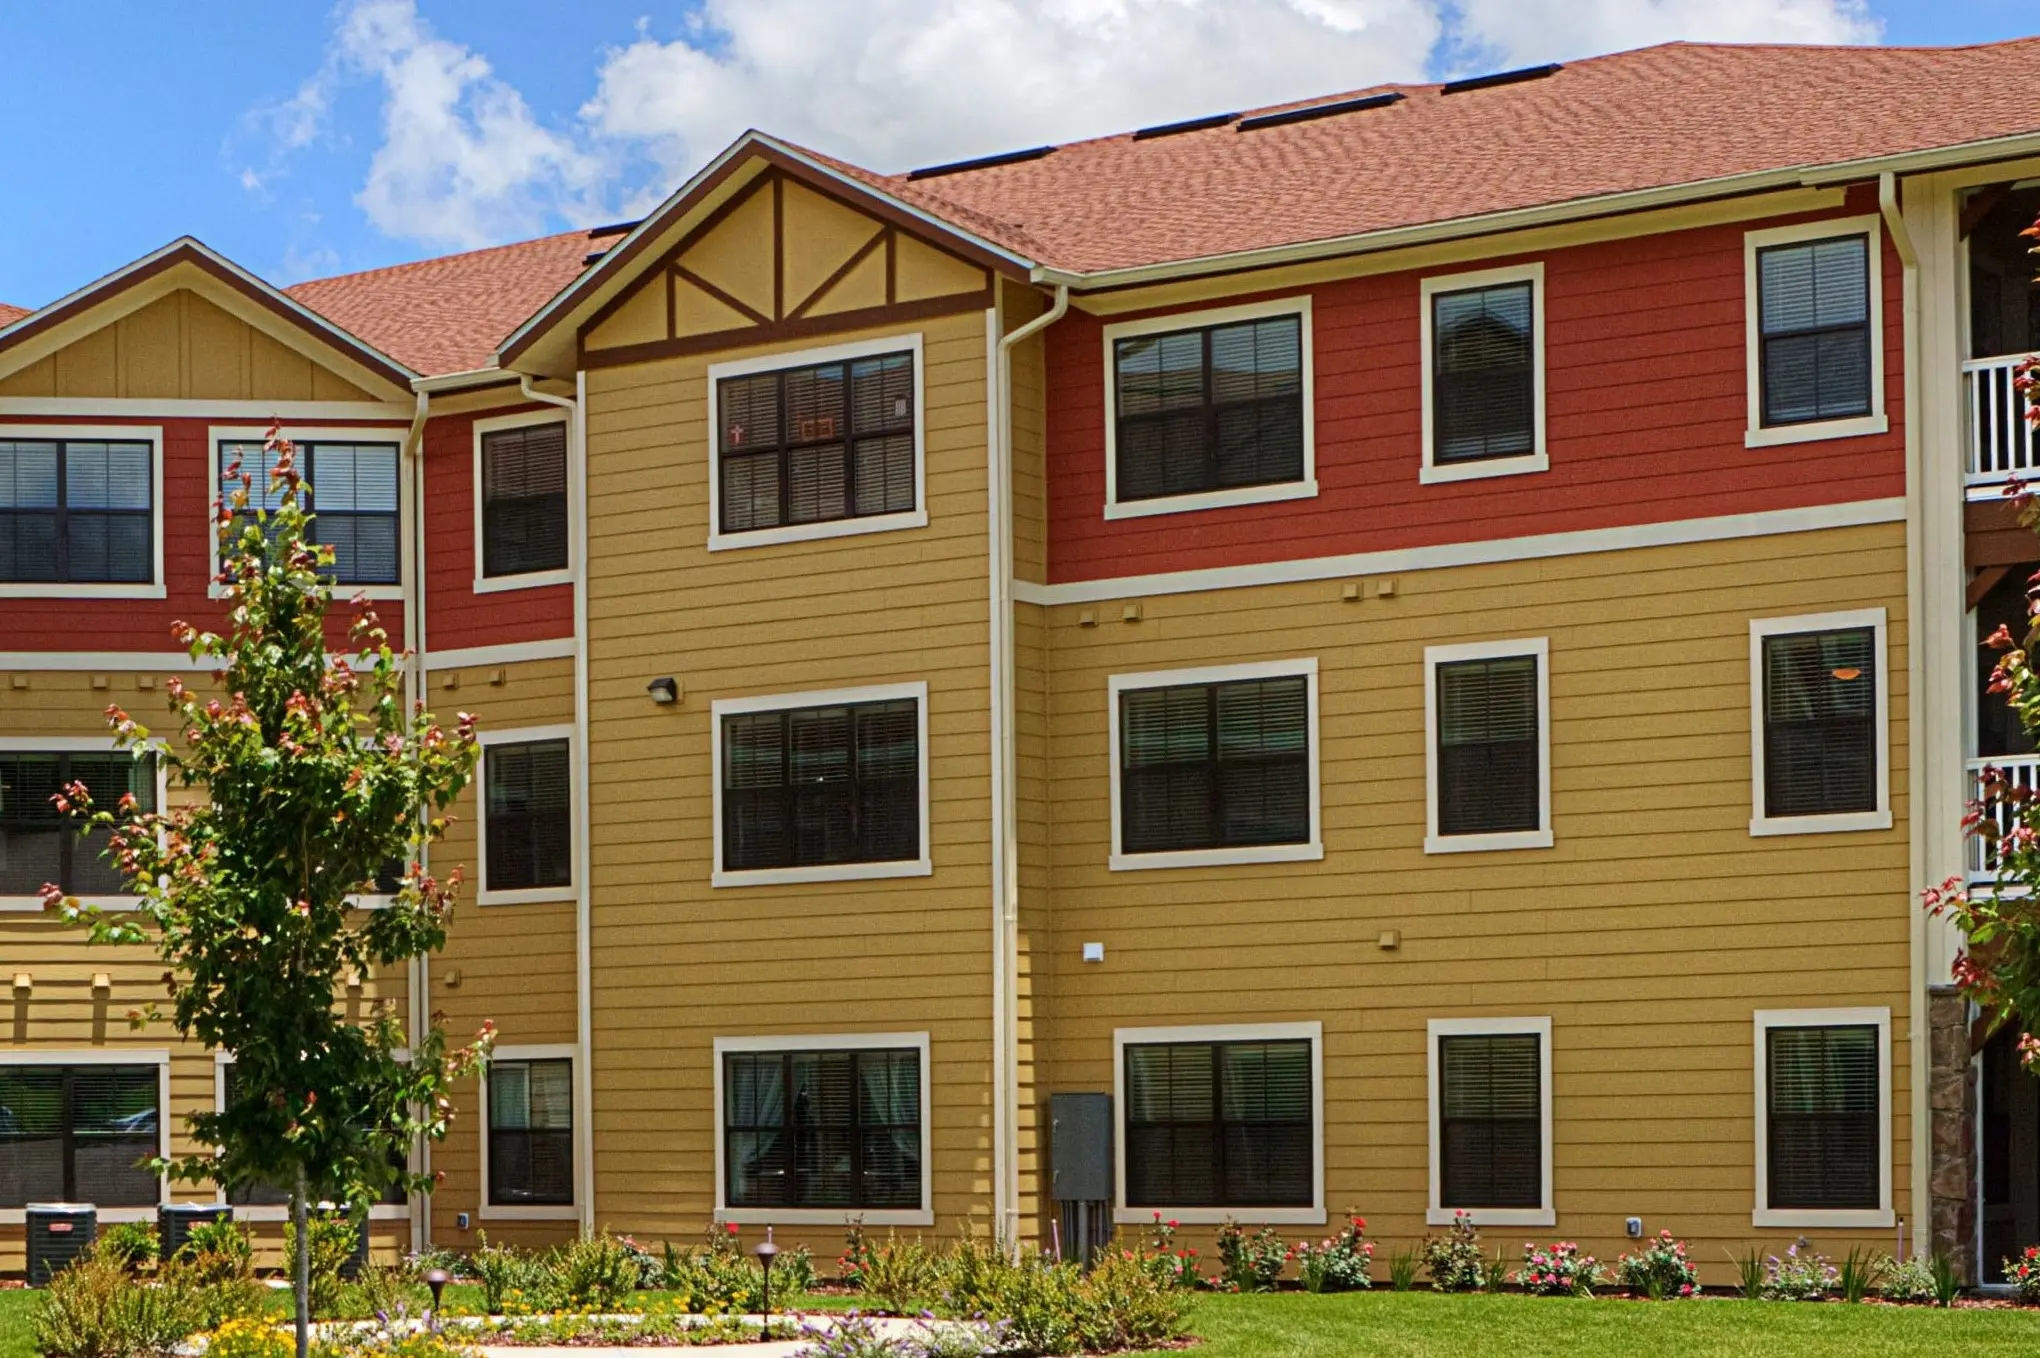 Rear exterior of yellow and orange senior living apartment building in the Villages in Wildwood, FL